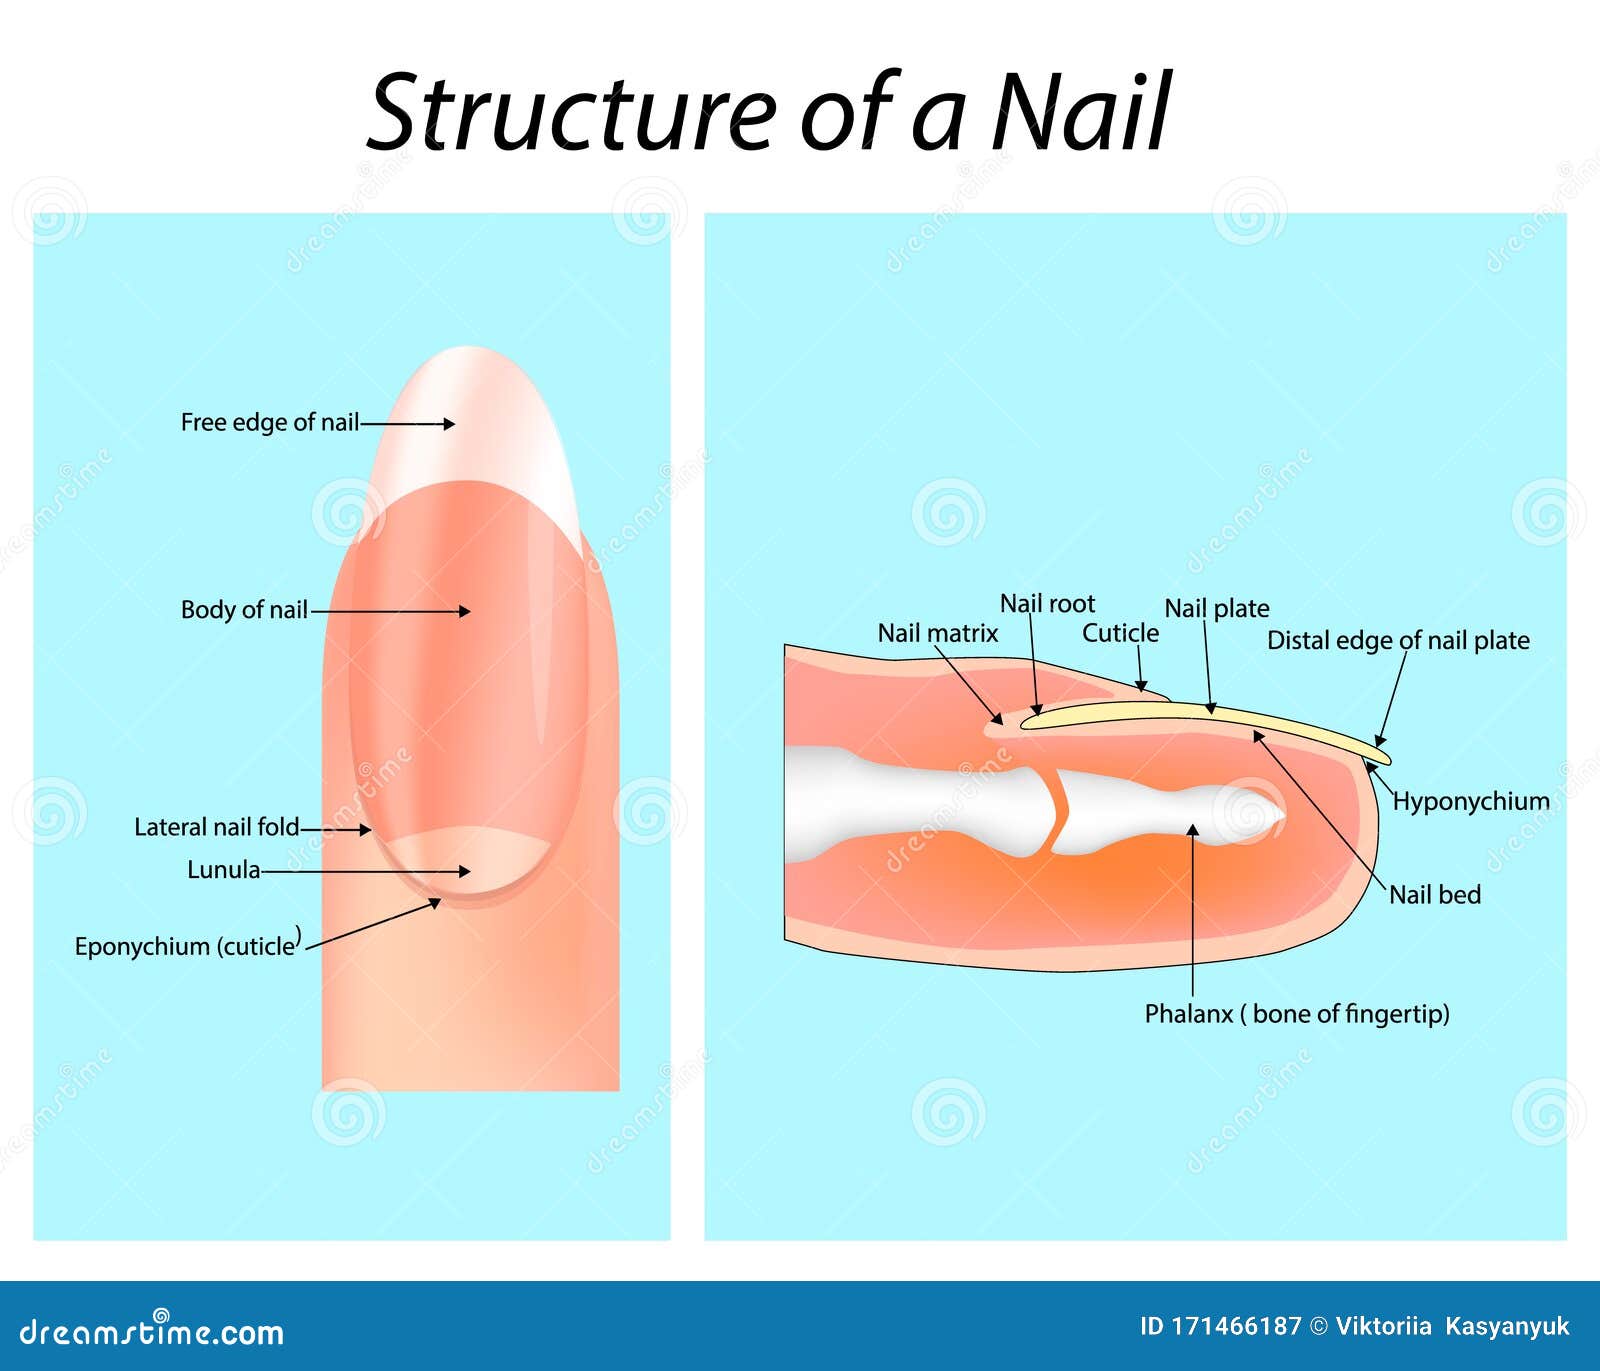 Premium Vector | Nail anatomy structure training poster flat style design  vector illustration.